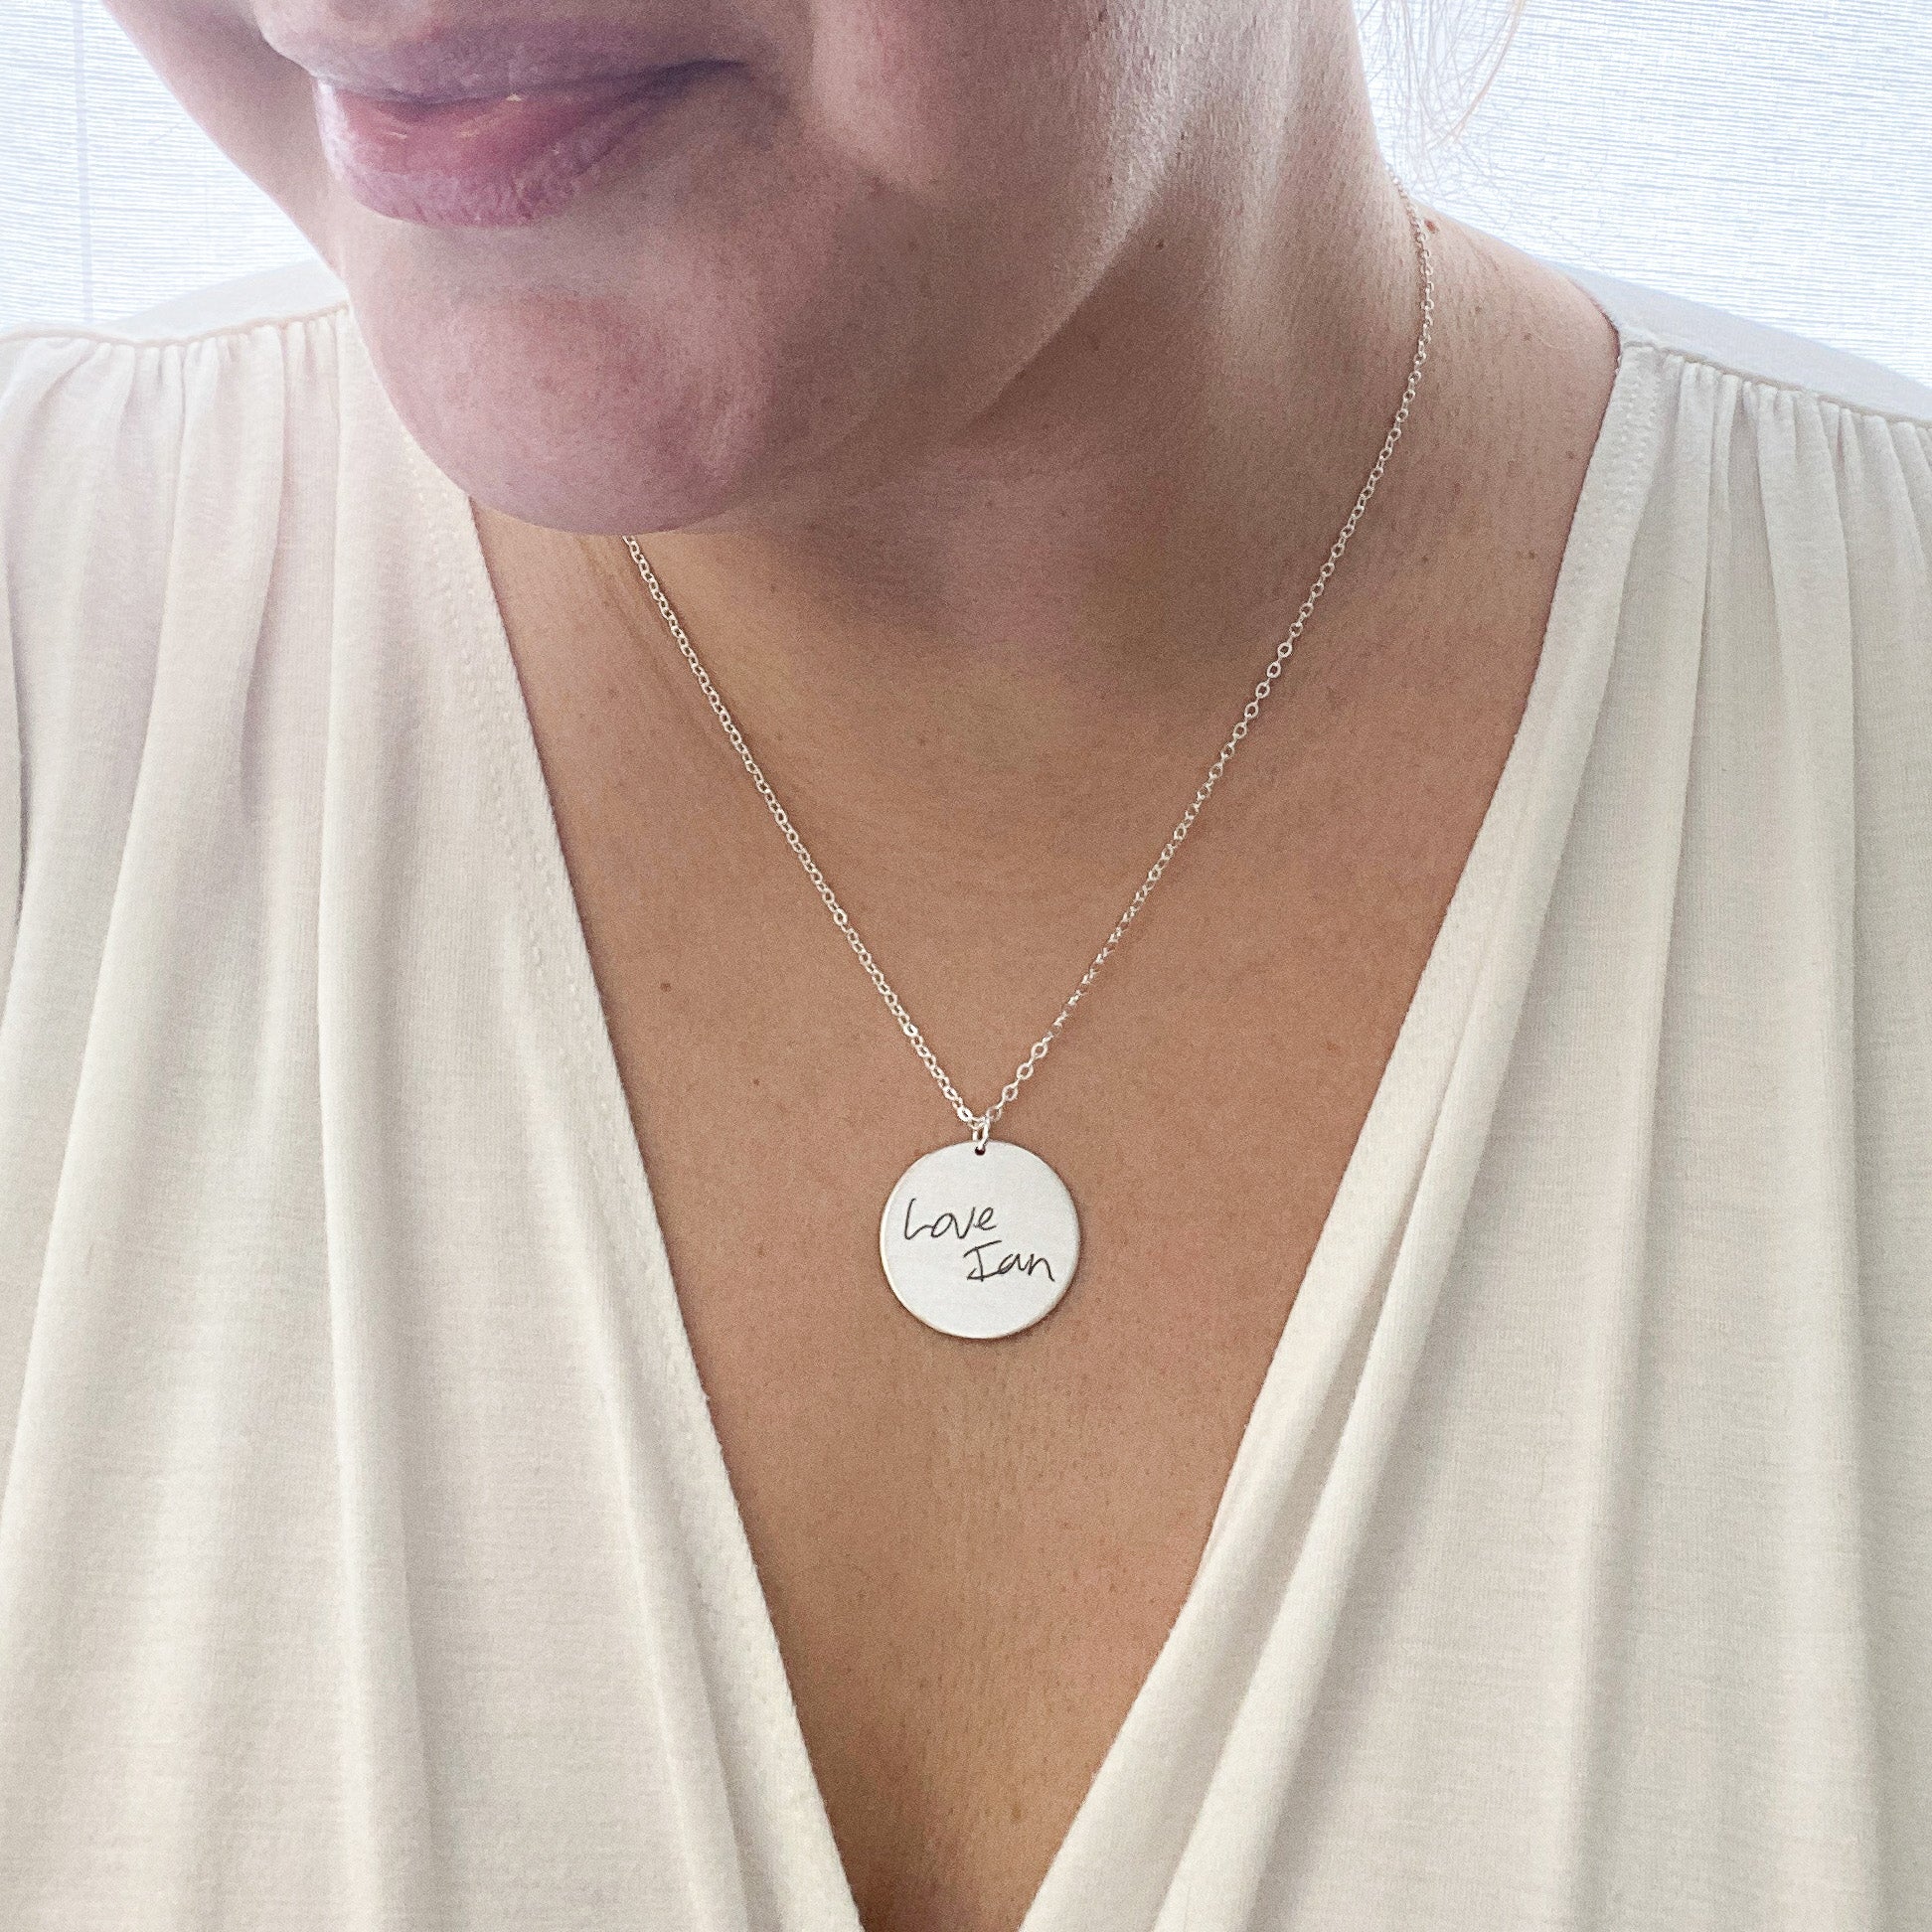 Lucy Necklace | Large Round Handwriting Pendant Engraved With Your Own Signatures, Doodles and Fingerprints | Scripted Jewelry